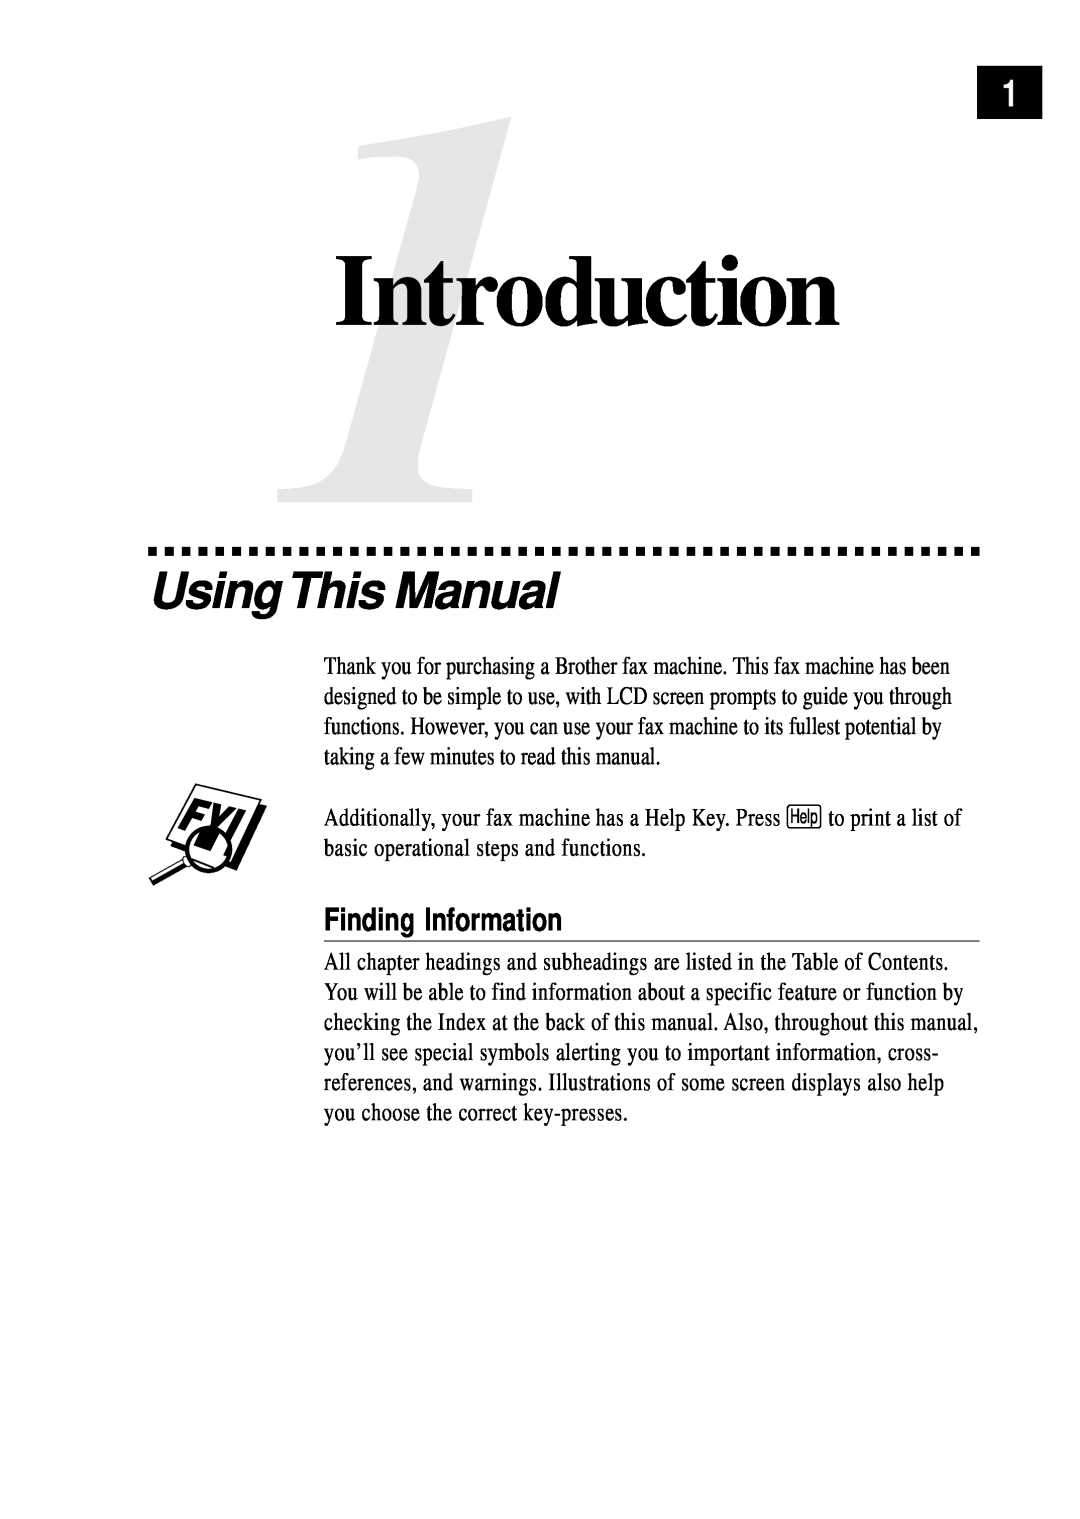 Brother FAX 255 owner manual UsingThis Manual, Finding Information, 1Introduction 